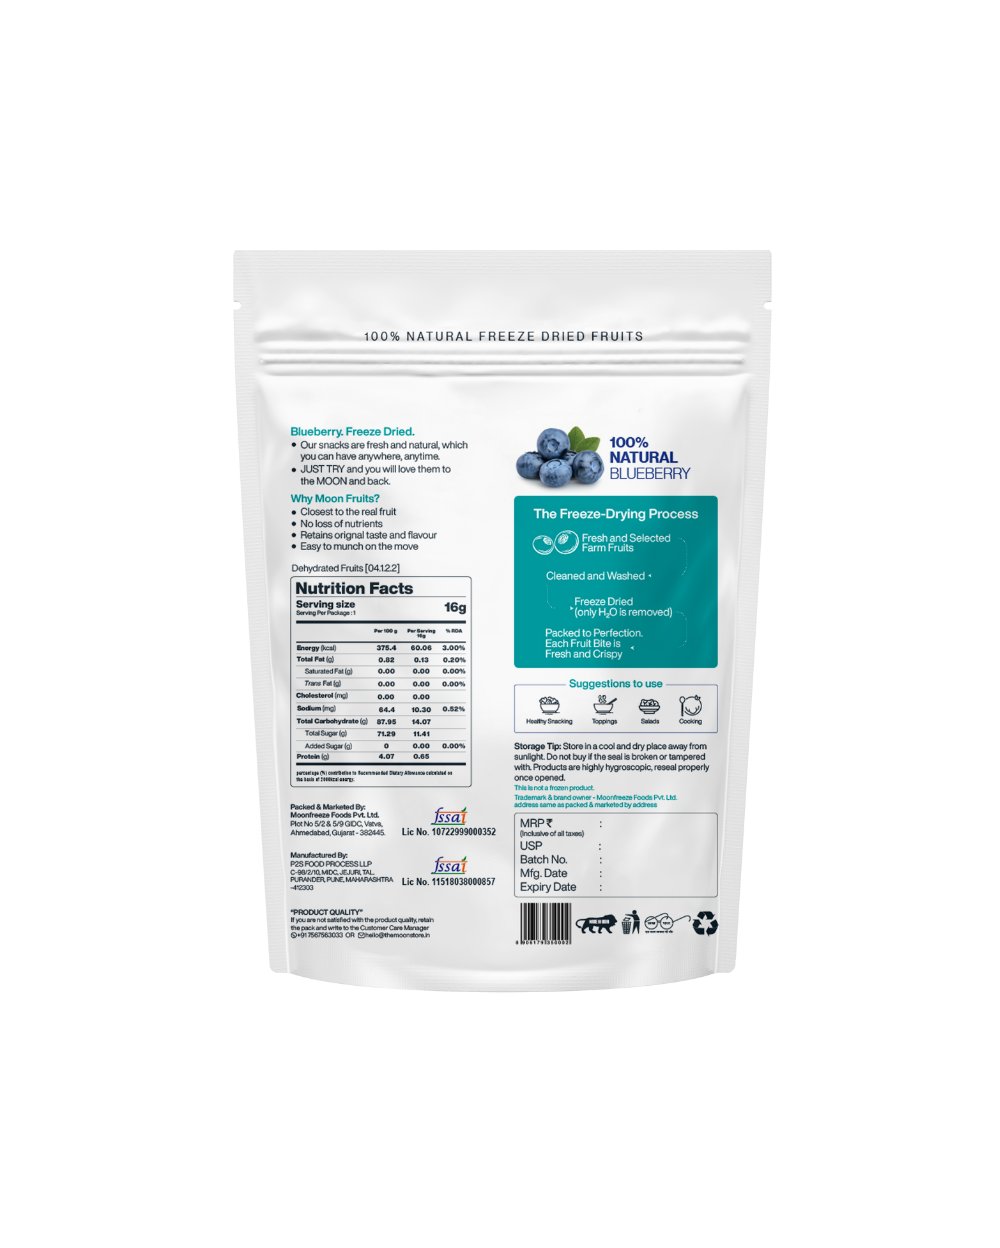 A package of MOONFREEZE FOODS PRIVATE LIMITED Moon Freeze Dried Blueberry Pack of 3 with antioxidant properties, including nutritional information and descriptions on the back.